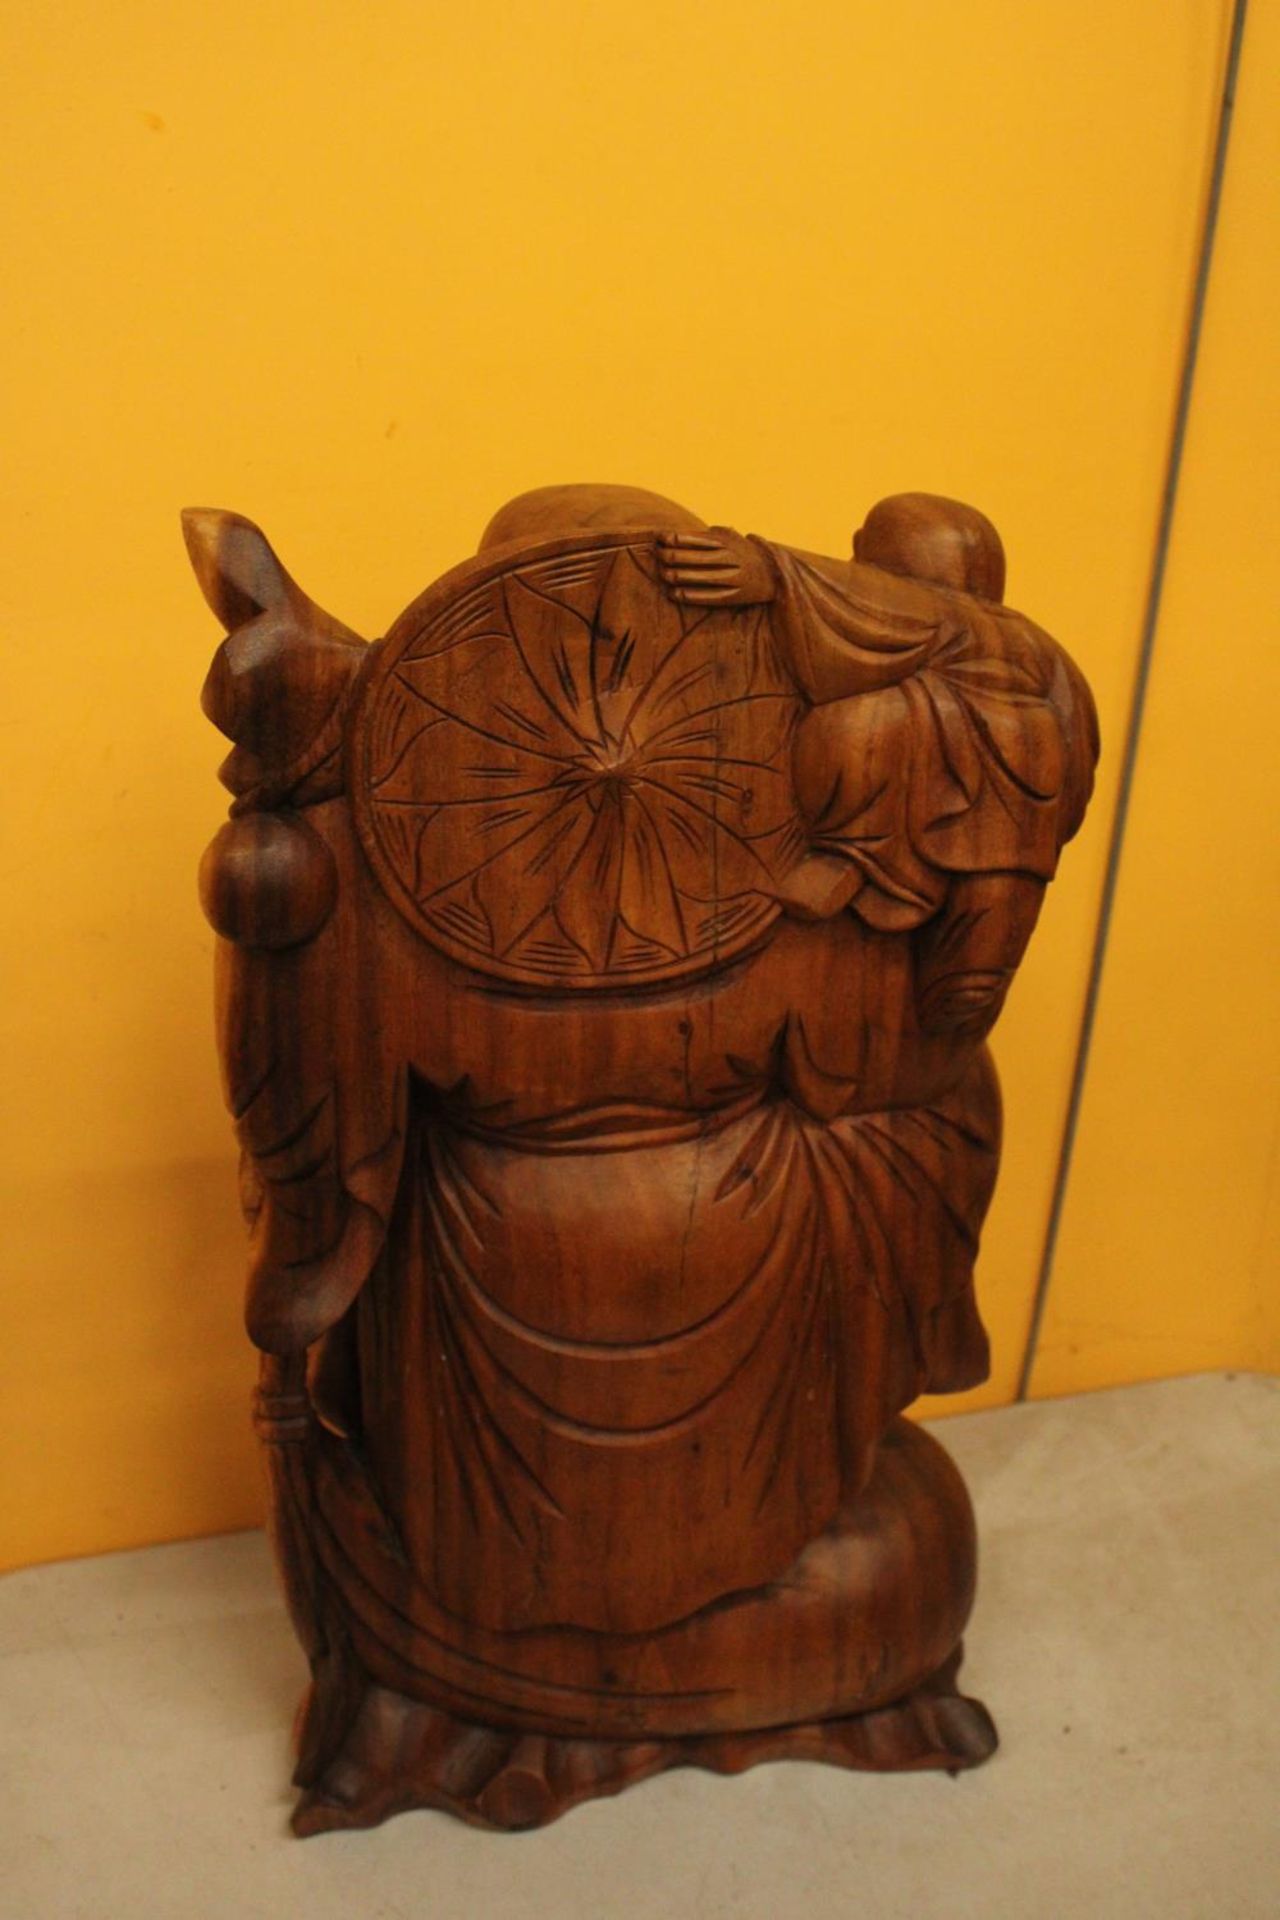 A CARVED WOODEN LAUGHING BUDDAH FIGURE 20" TALL - Image 5 of 6